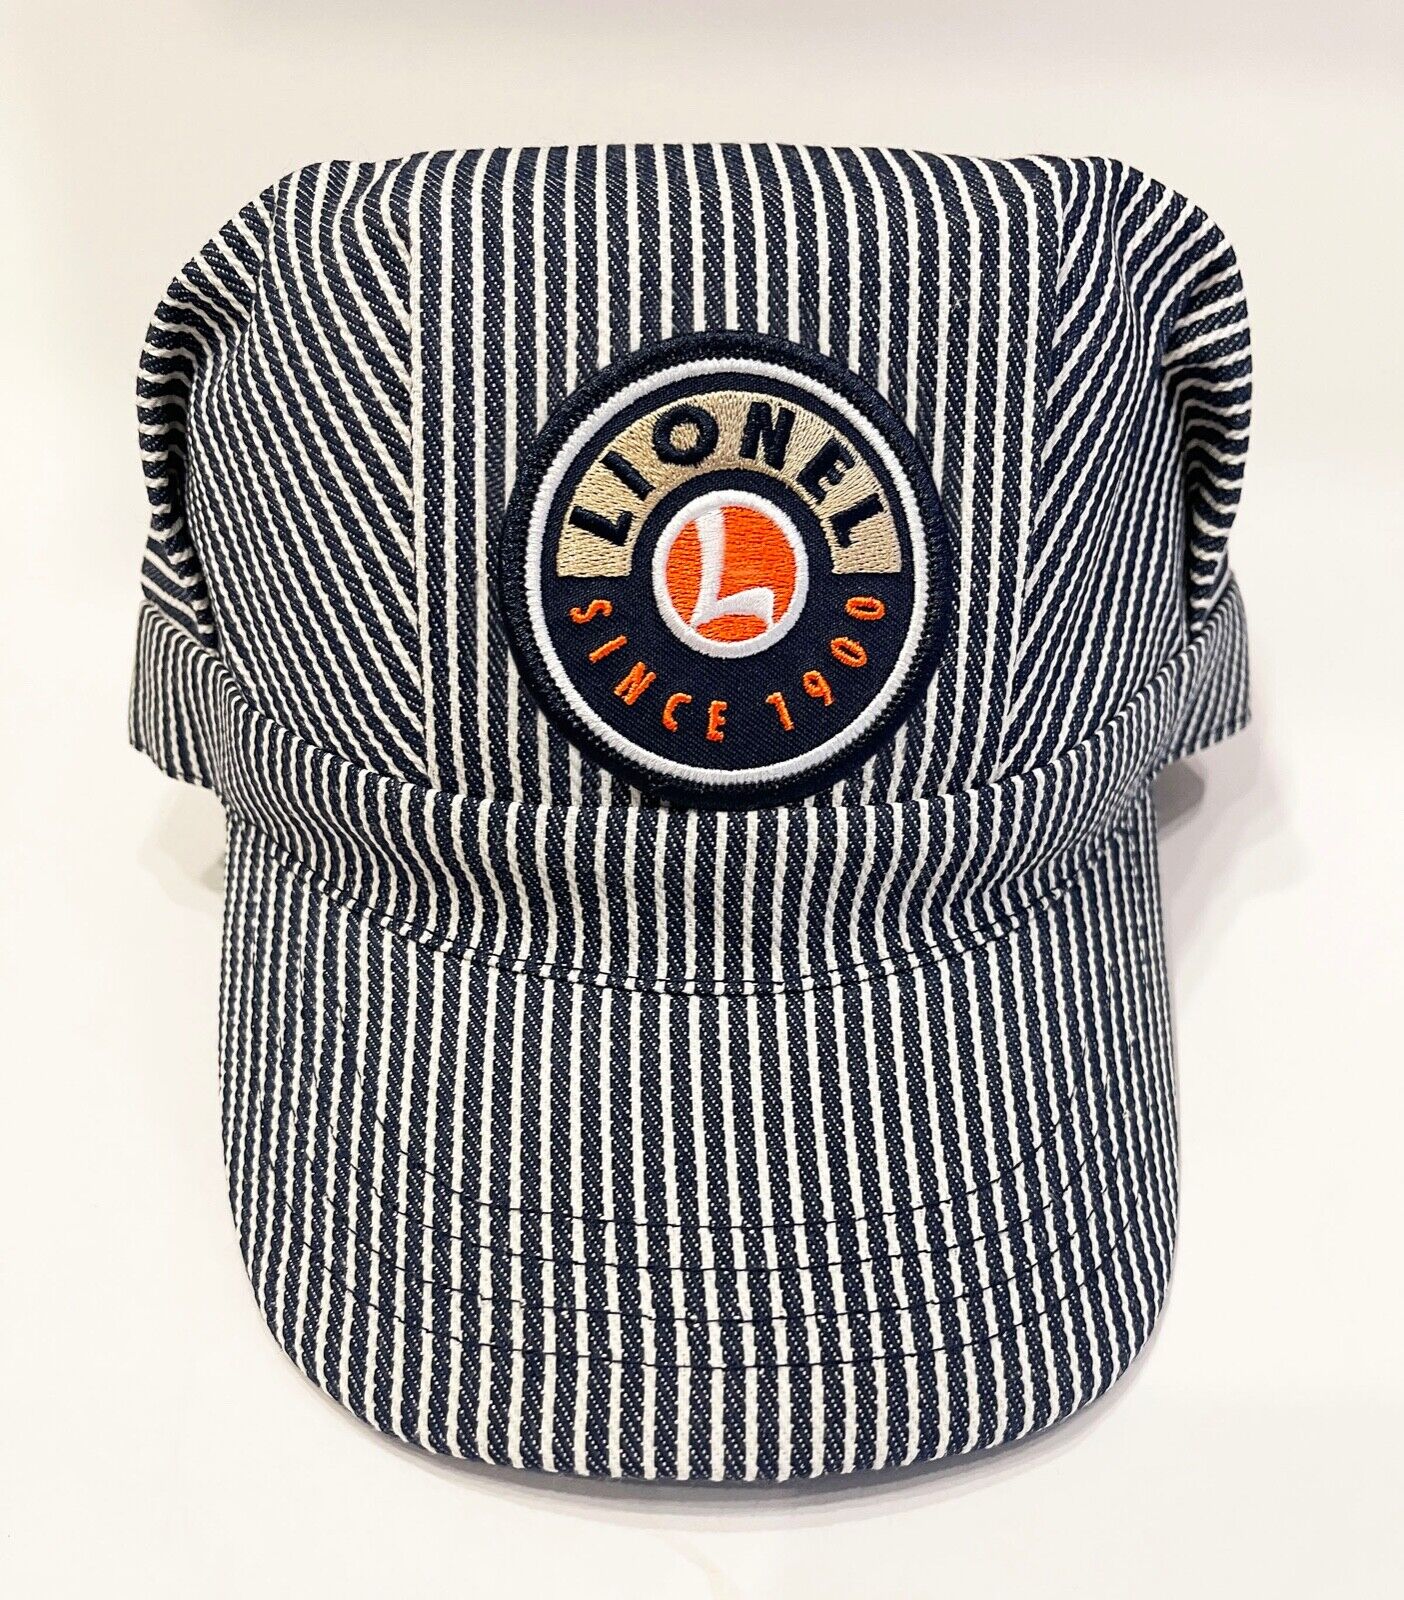 Classic LIONEL TRAINS HICKORY-STRIPED ENGINEER'S HAT Adult Size, Brand New